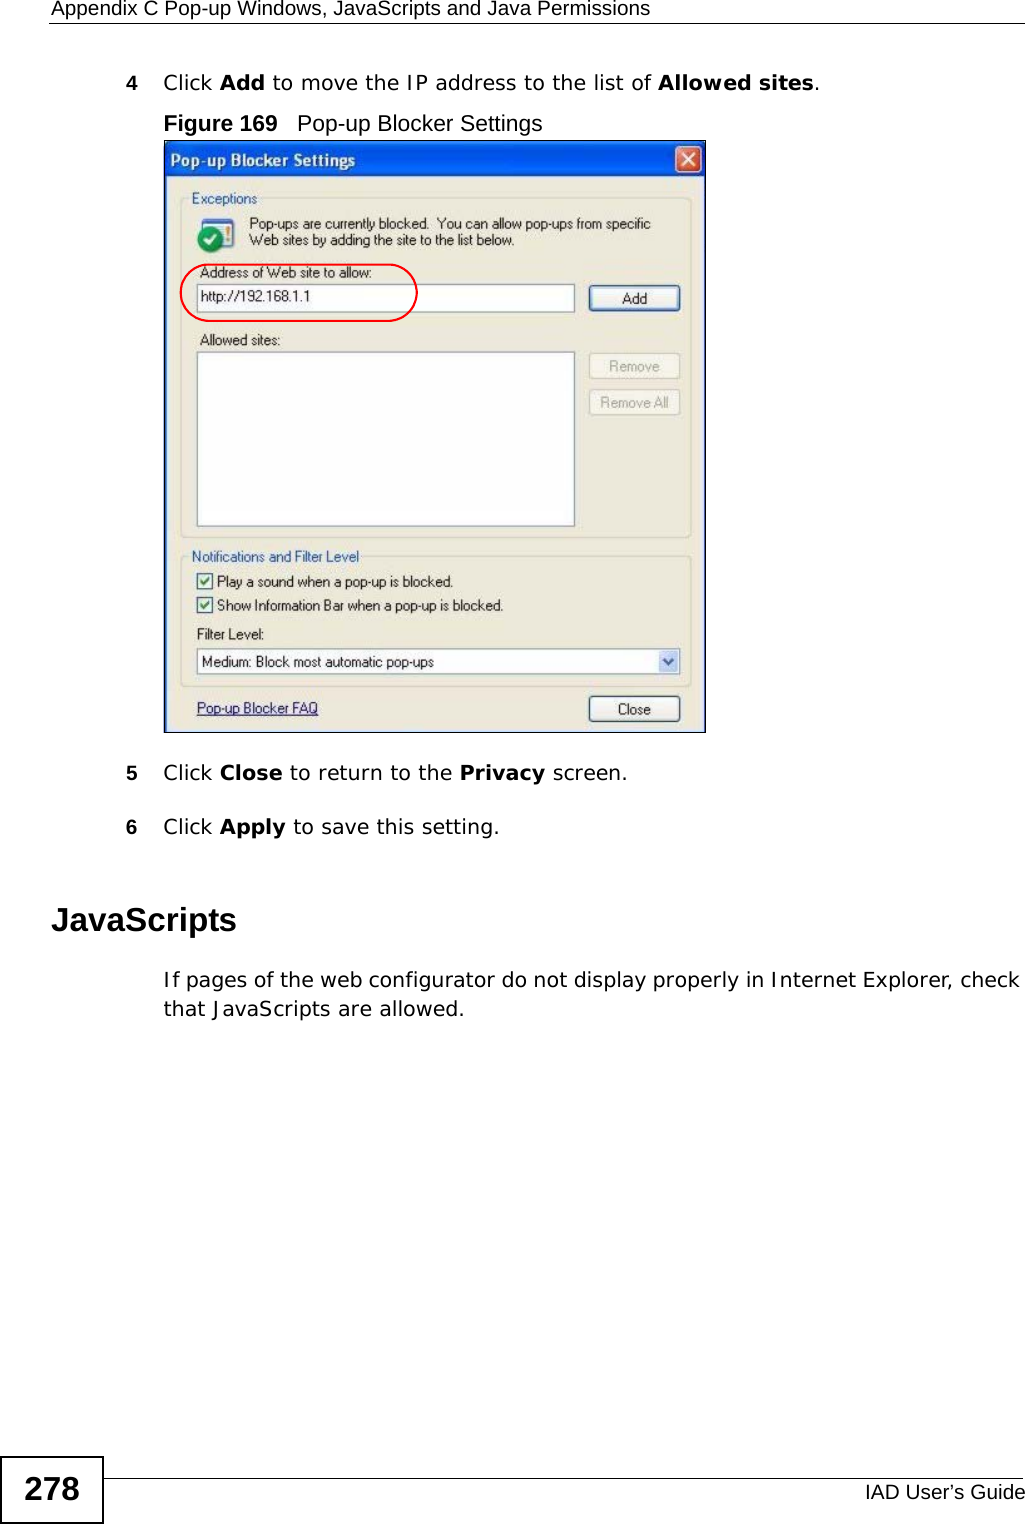 Appendix C Pop-up Windows, JavaScripts and Java PermissionsIAD User’s Guide2784Click Add to move the IP address to the list of Allowed sites.Figure 169   Pop-up Blocker Settings5Click Close to return to the Privacy screen. 6Click Apply to save this setting. JavaScriptsIf pages of the web configurator do not display properly in Internet Explorer, check that JavaScripts are allowed. 